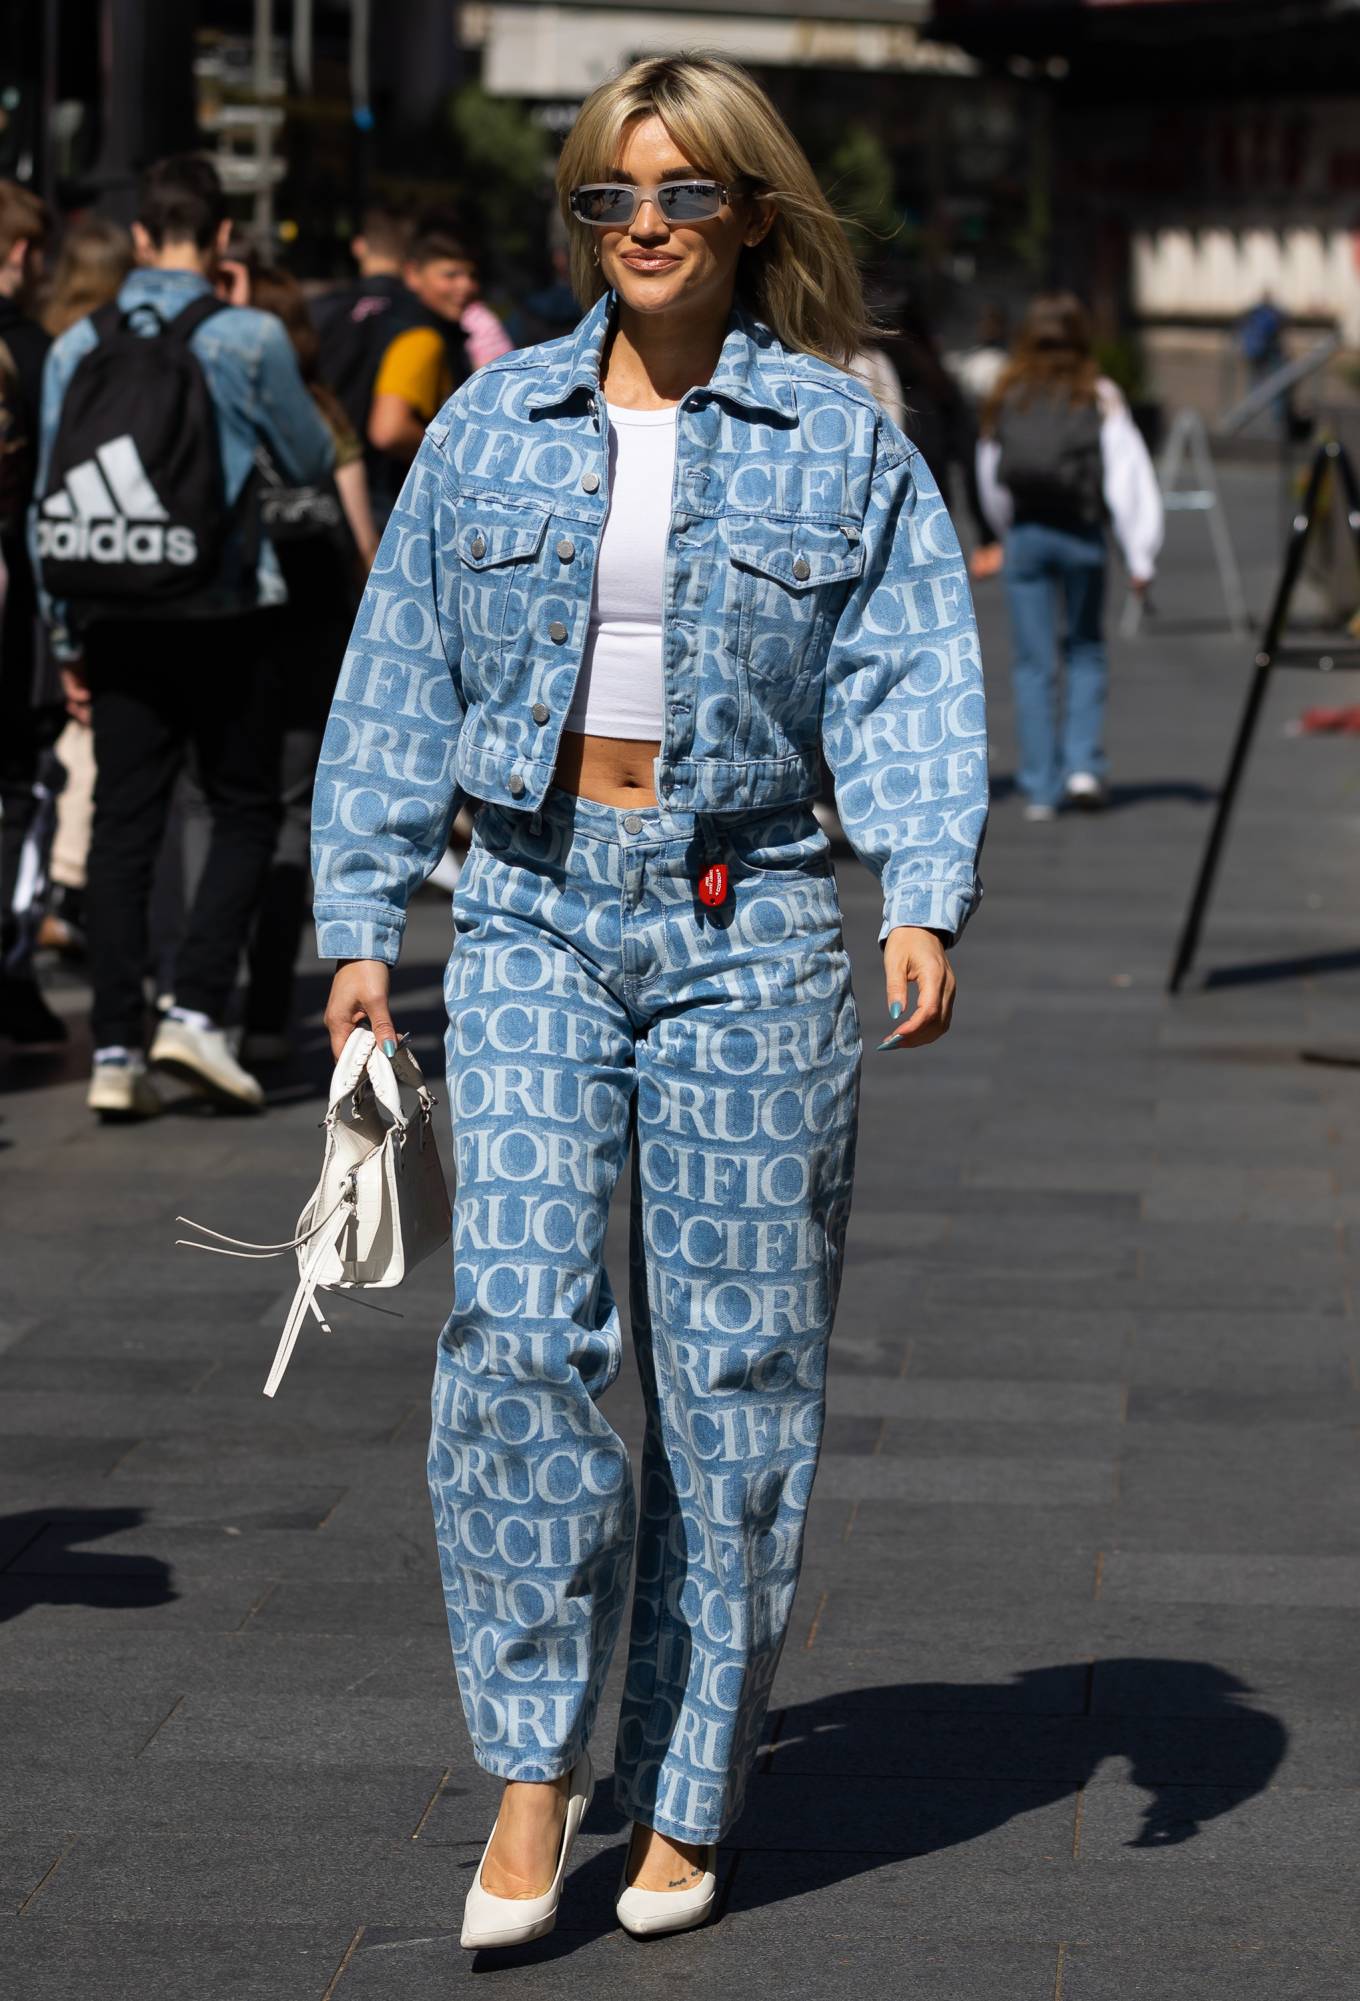 Ashley Roberts - Wearining a printed double denim suit in London